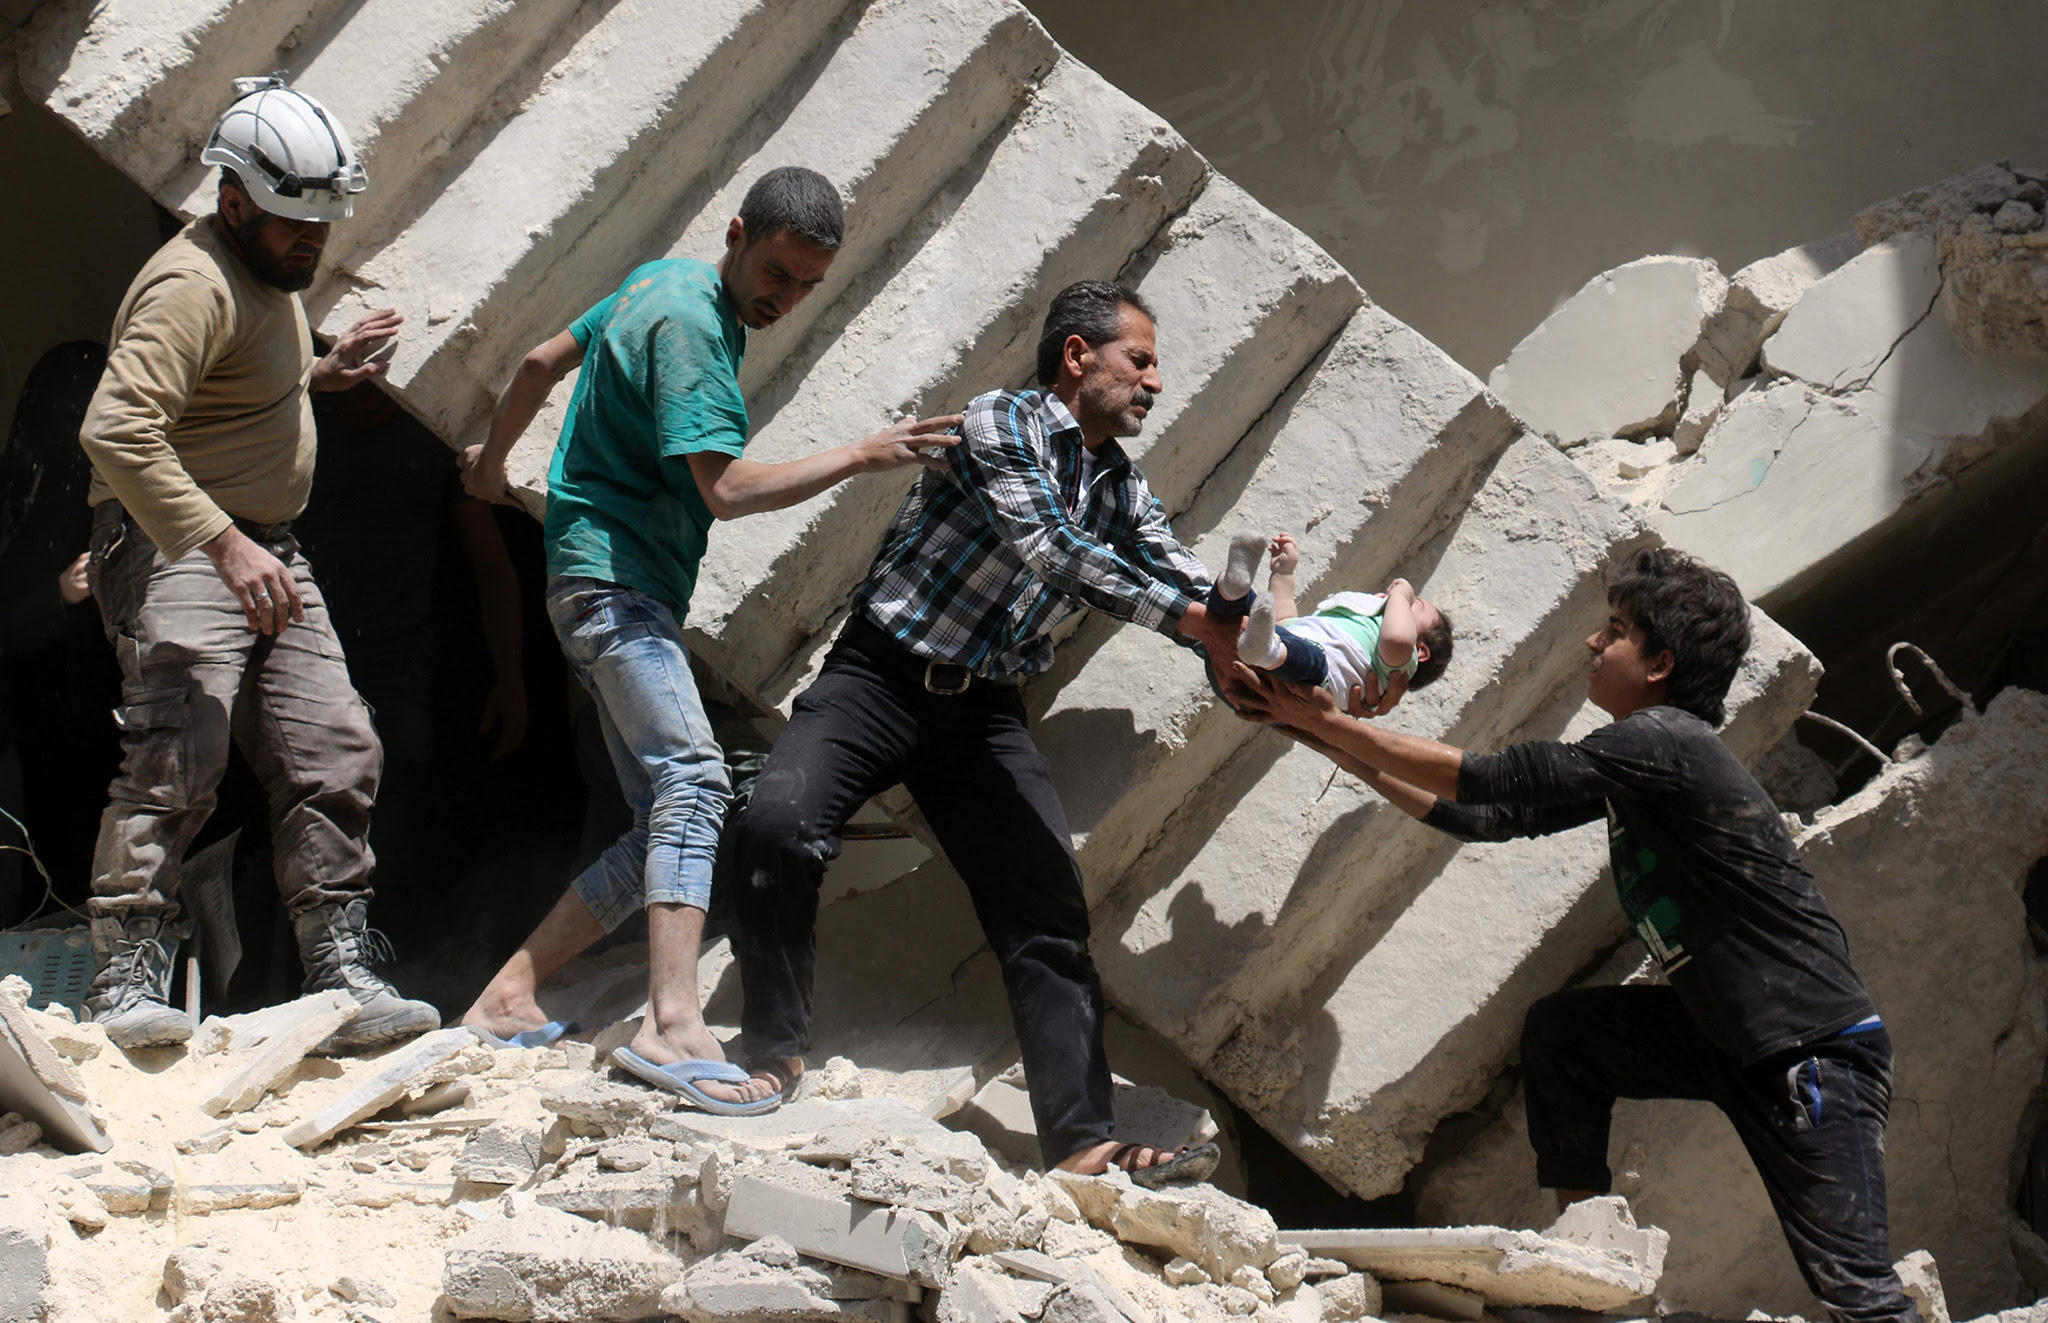 Syrian civil defence volunteers and rescuers remove a baby from under the rubble of a destroyed building following a reported air strike on the rebel-held neighbourhood of al-Kalasa in the northern Syrian city of Aleppo.